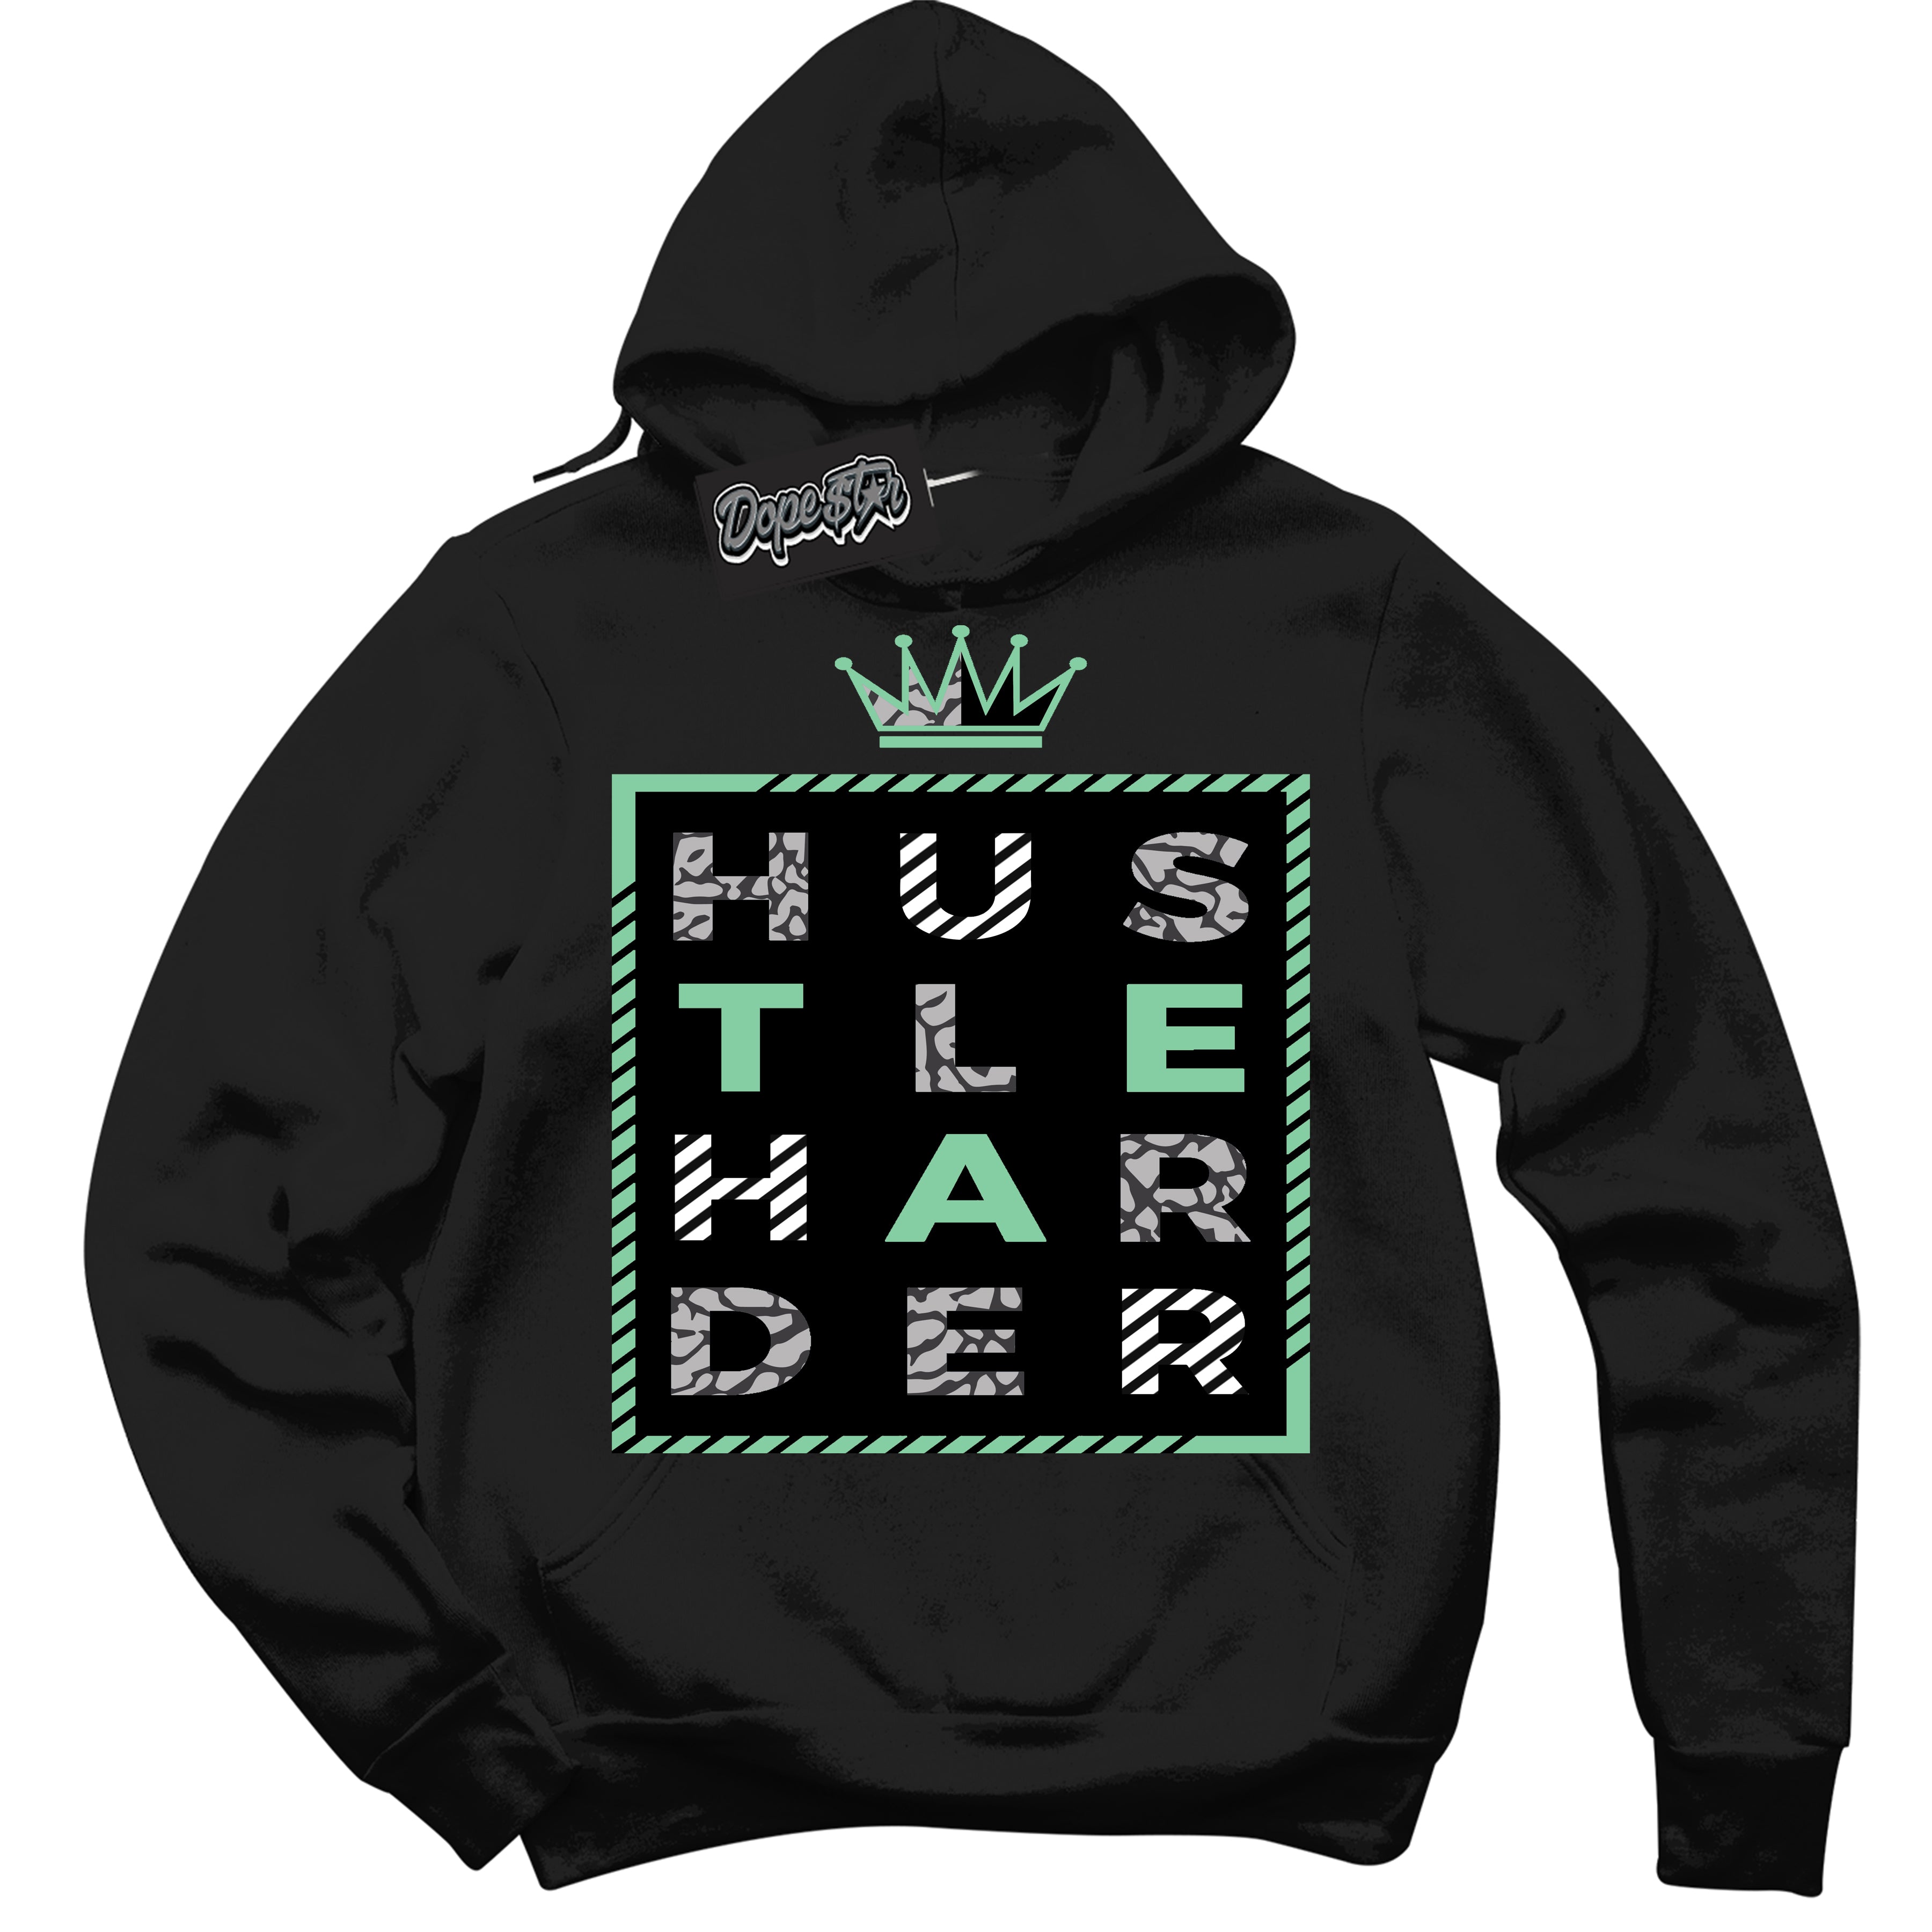 Cool Black Graphic DopeStar Hoodie with “ Hustle Harder “ print, that perfectly matches Green Glow 3S sneakers